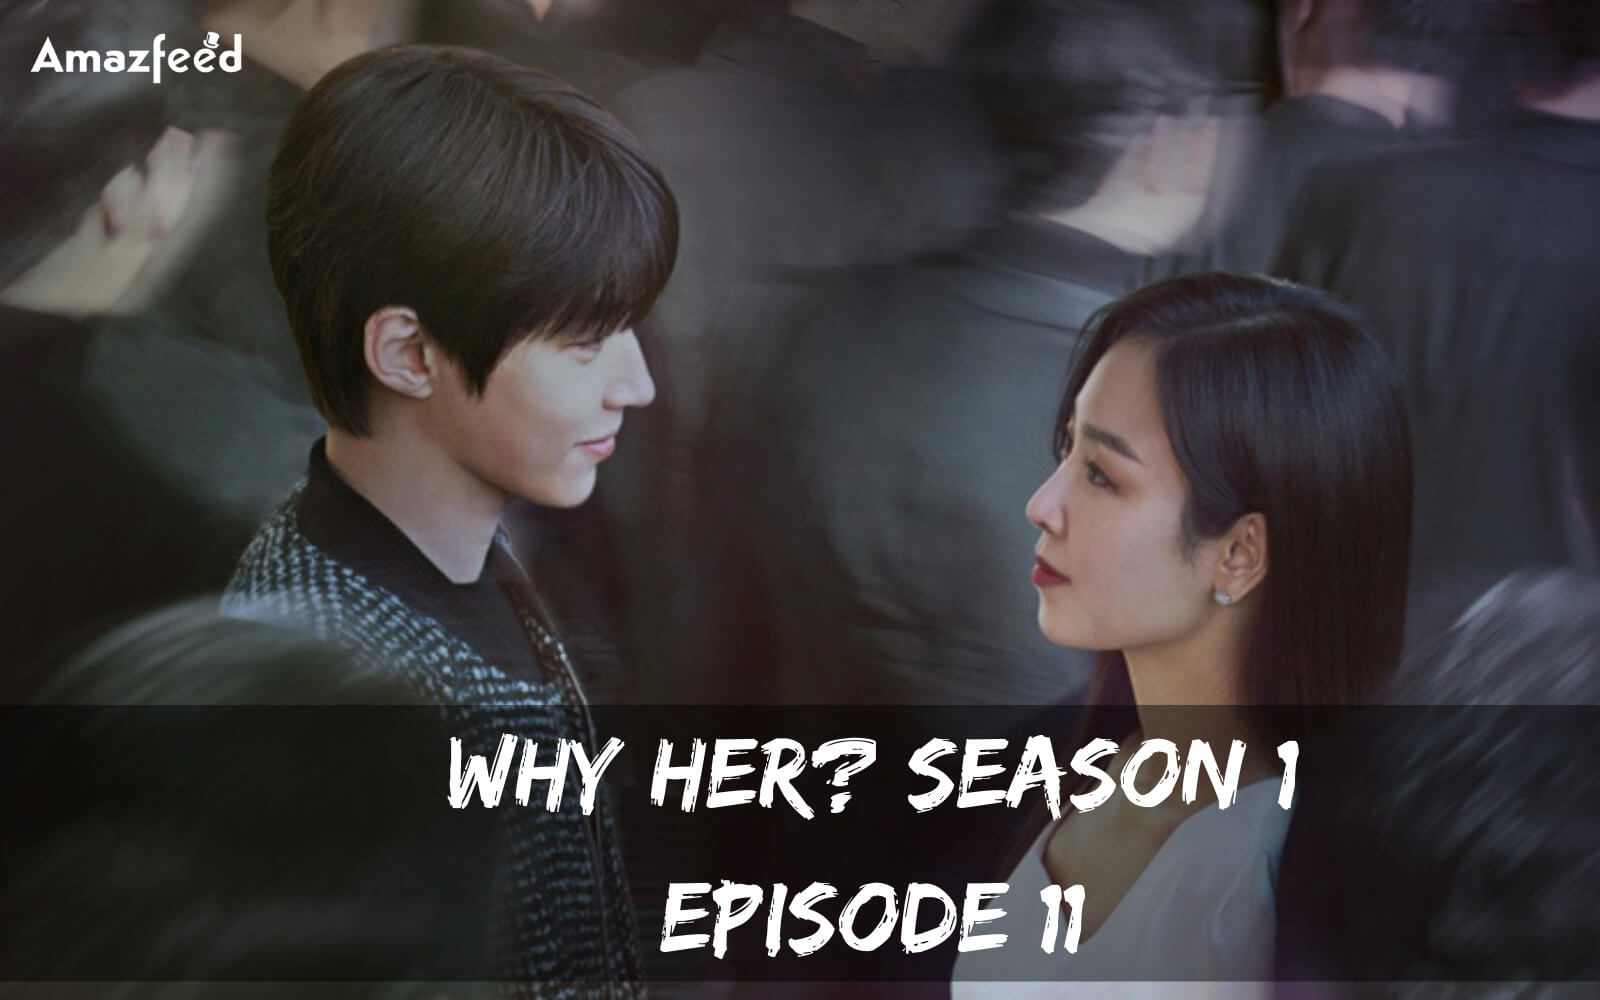 Why Her Season 1 Episode 11 release date